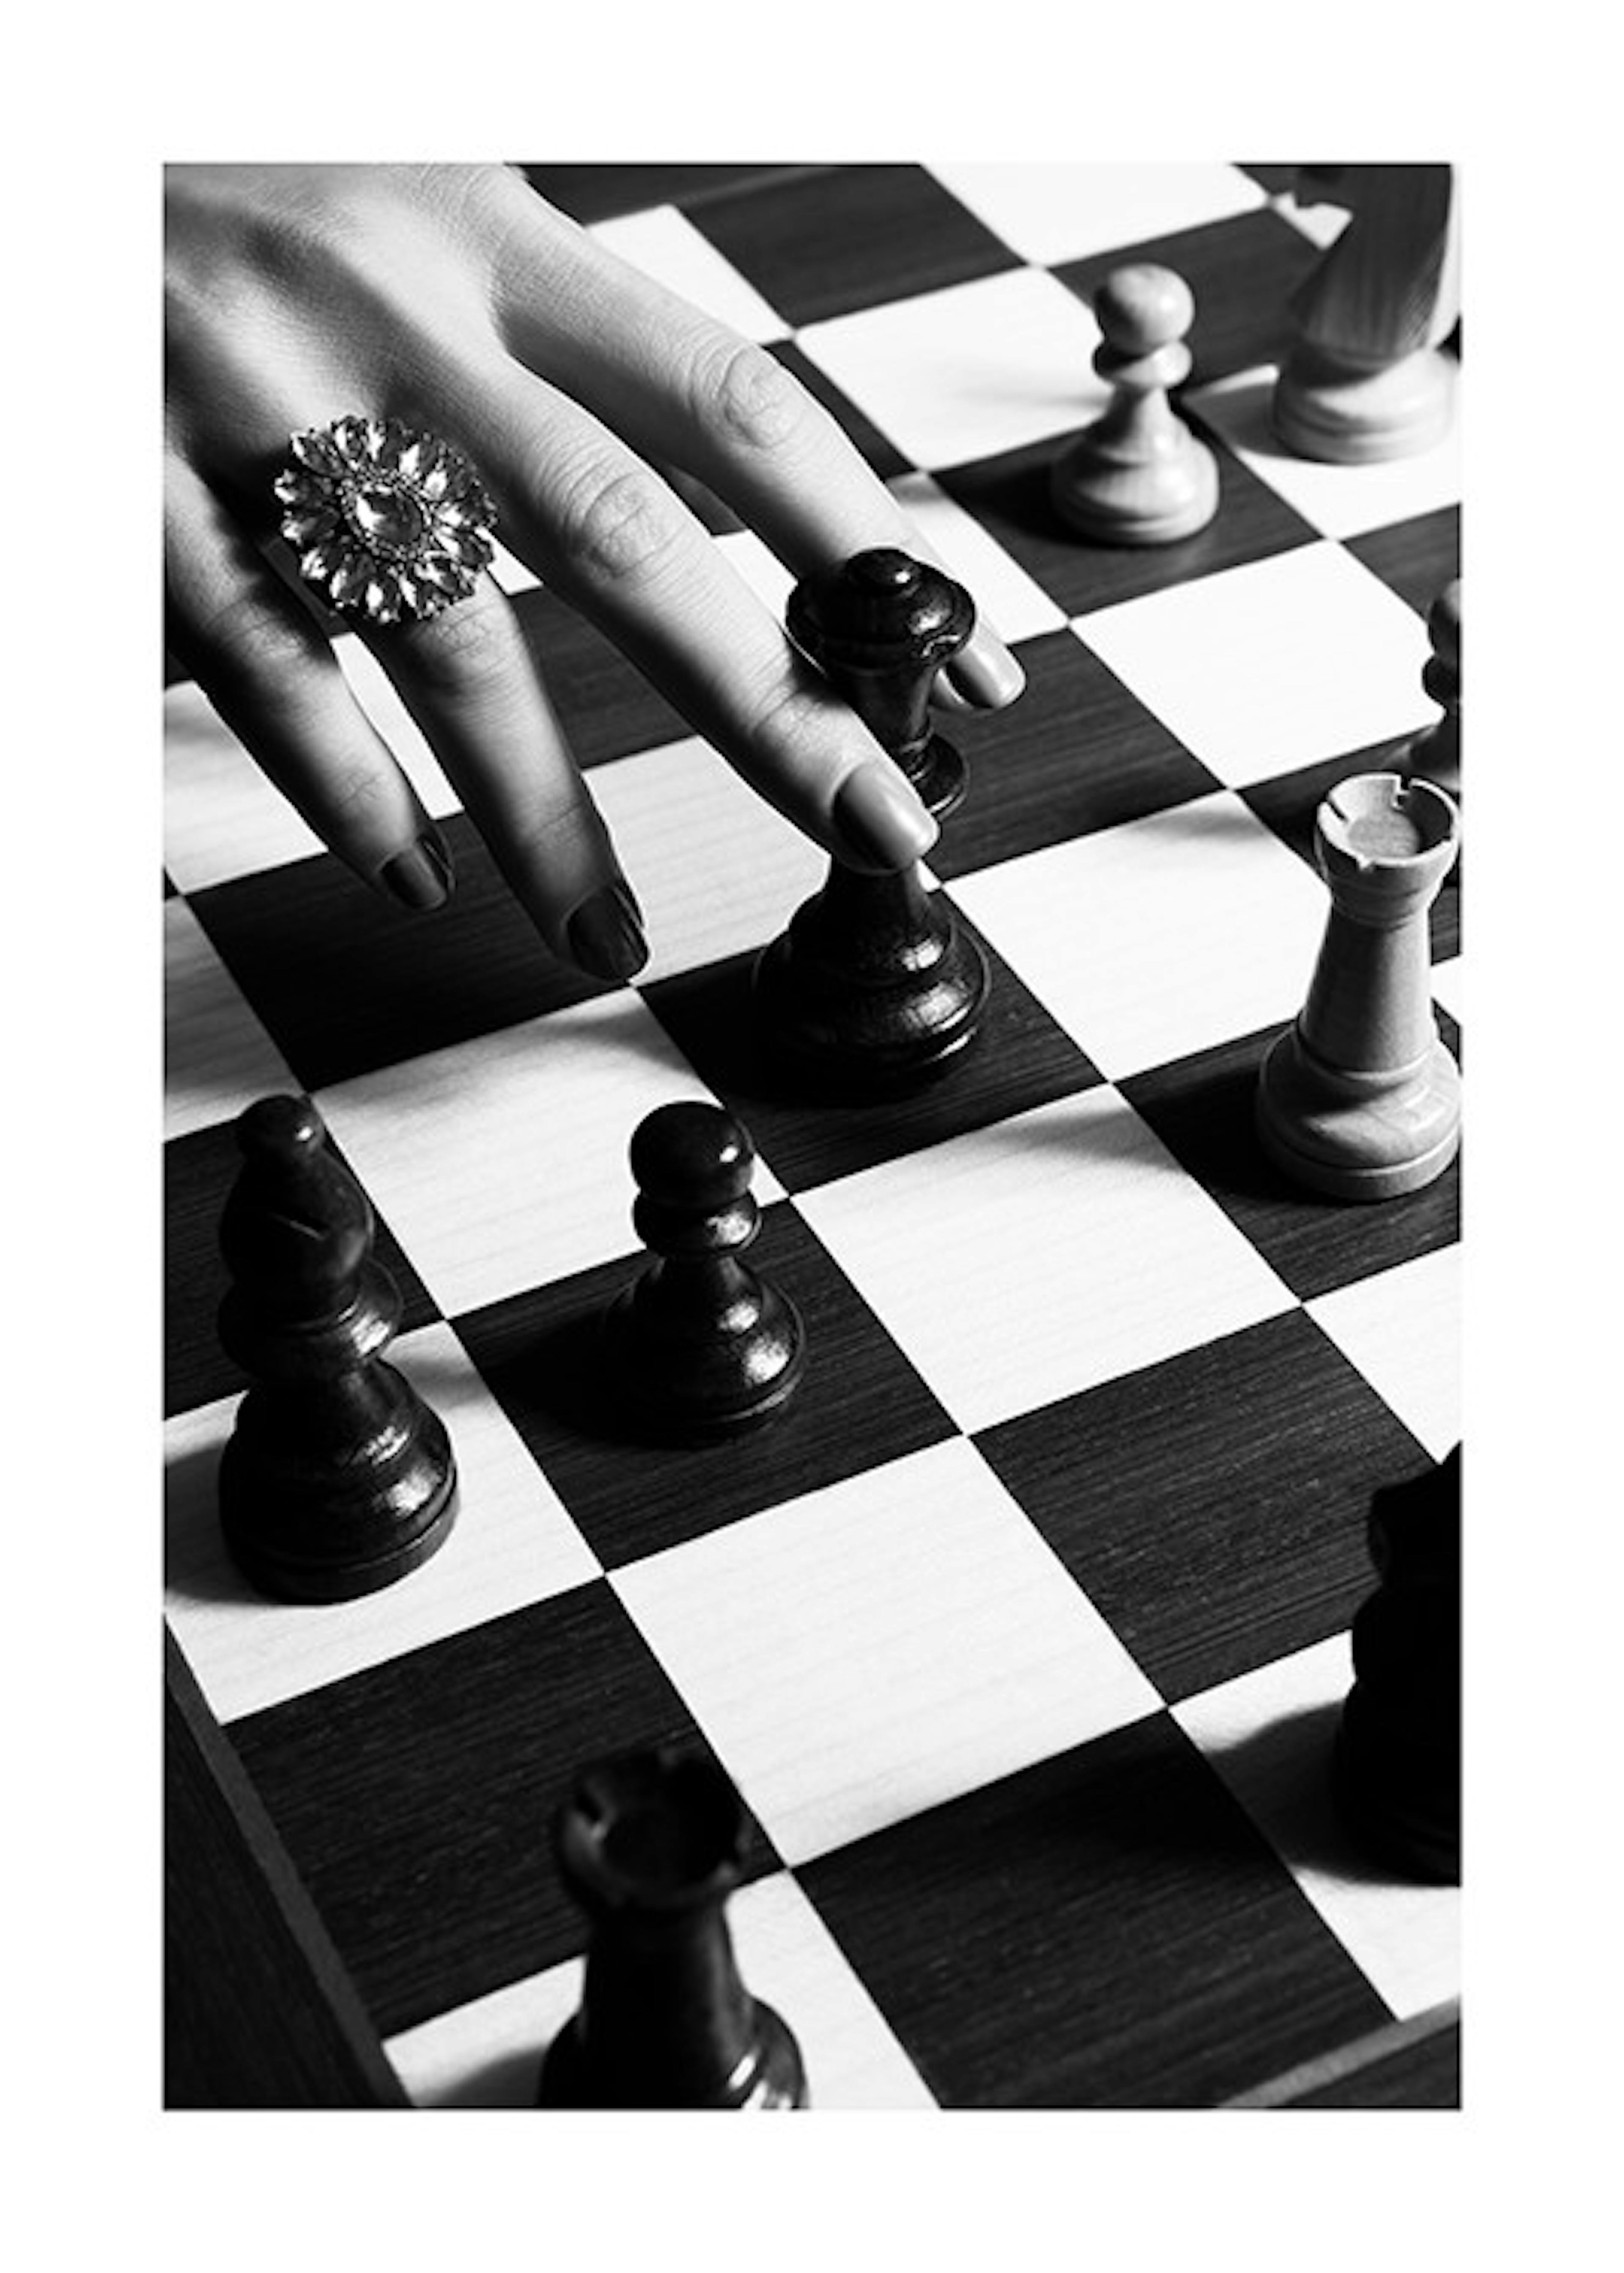 Chess Poster